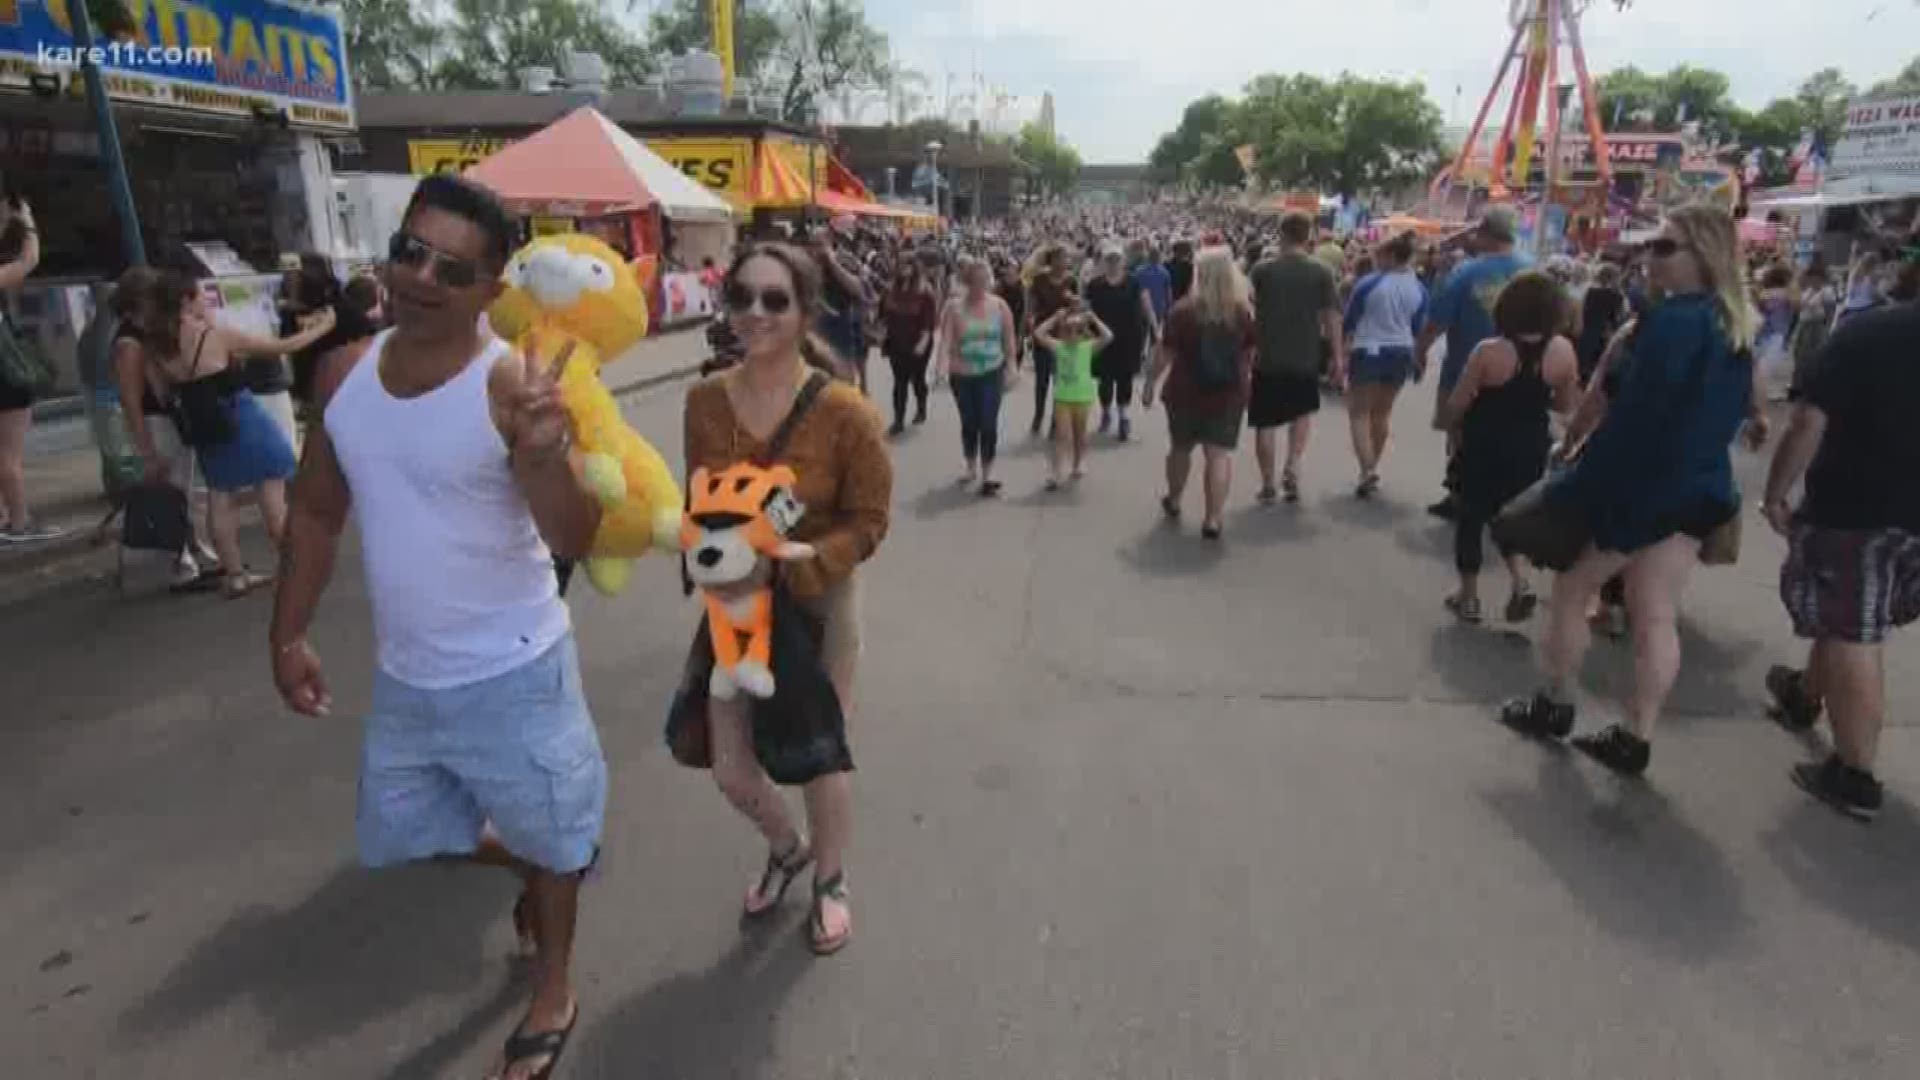 Cory Hepola tallied up the costs for one person experiencing a "normal" day at the Minnesota State Fair. https://kare11.tv/2wuPvuW